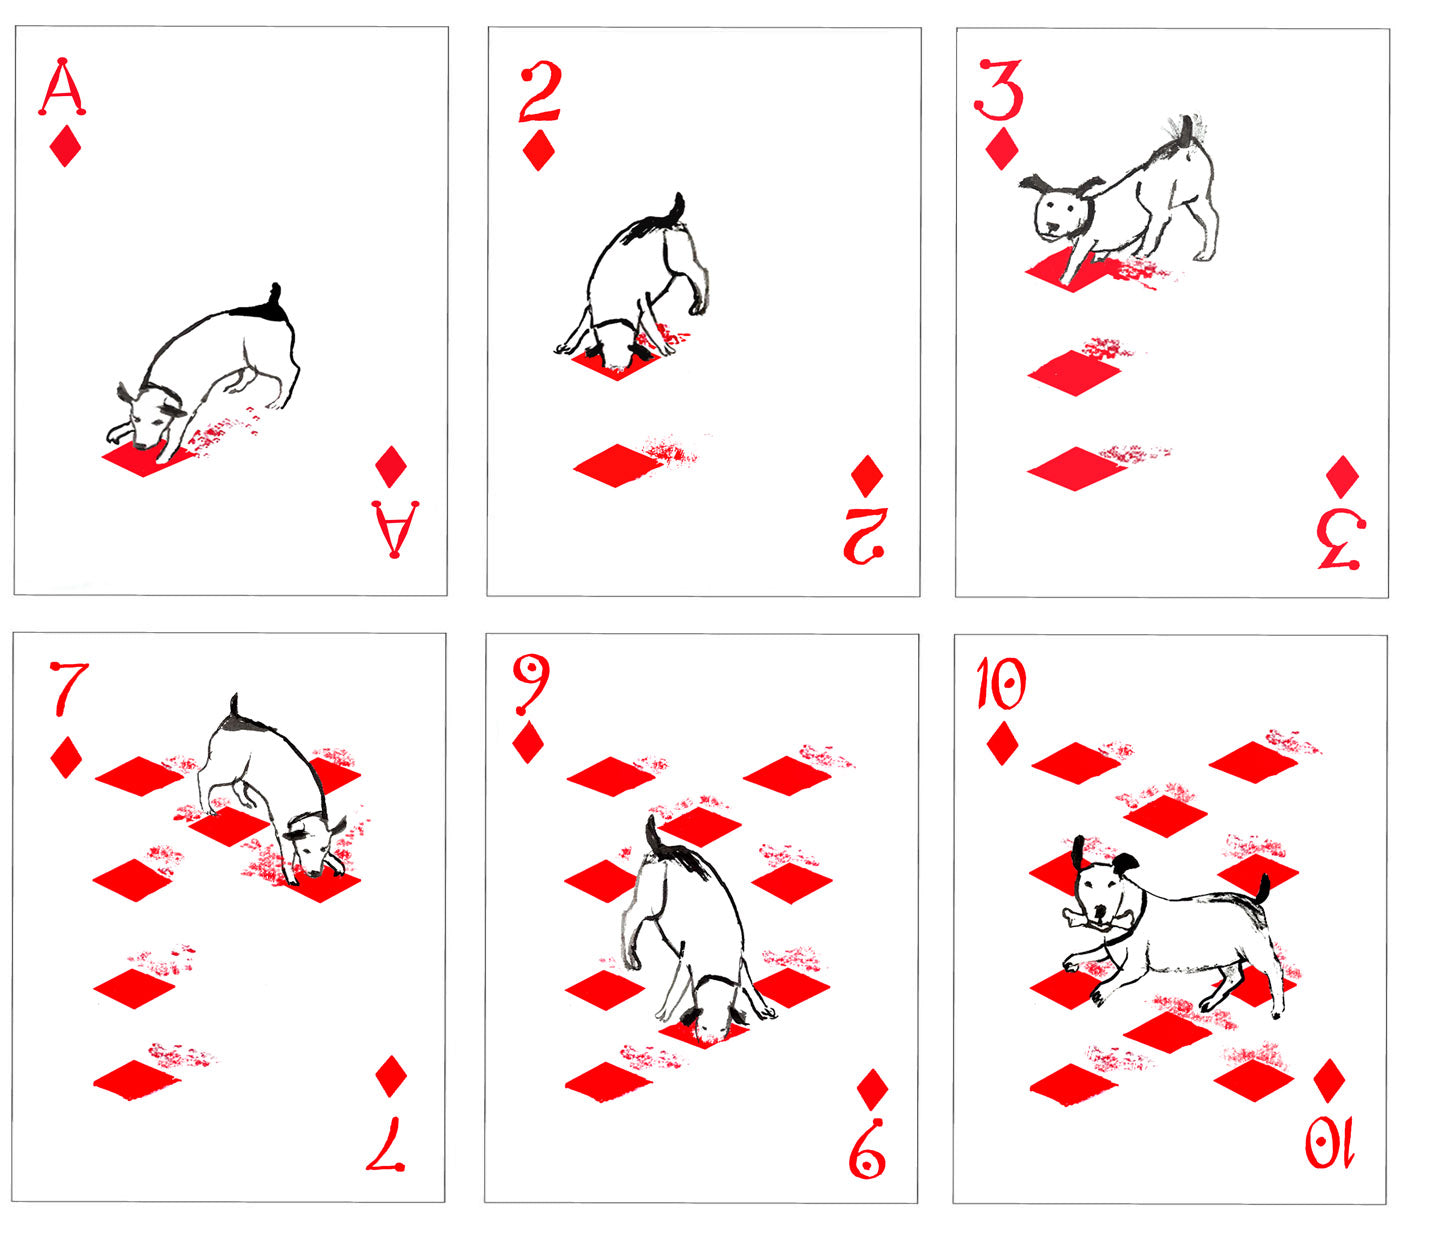 Playing cards with a Dog theme-Amuse your friends and enjoy your card games even more with fun dog themed playing cards.